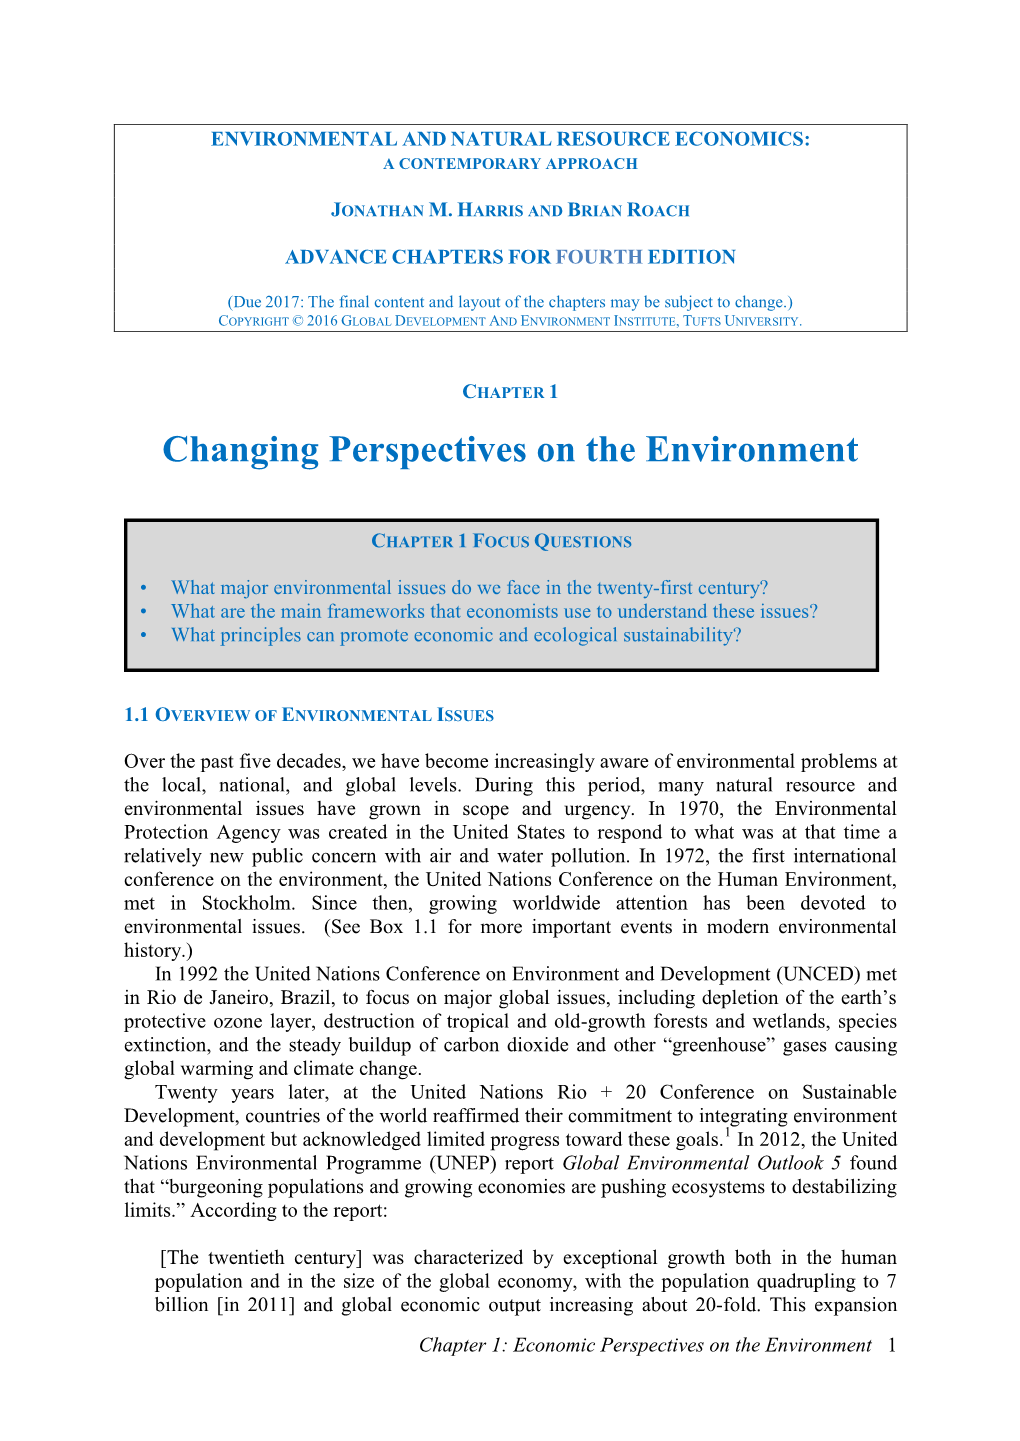 Changing Perspectives on the Environment